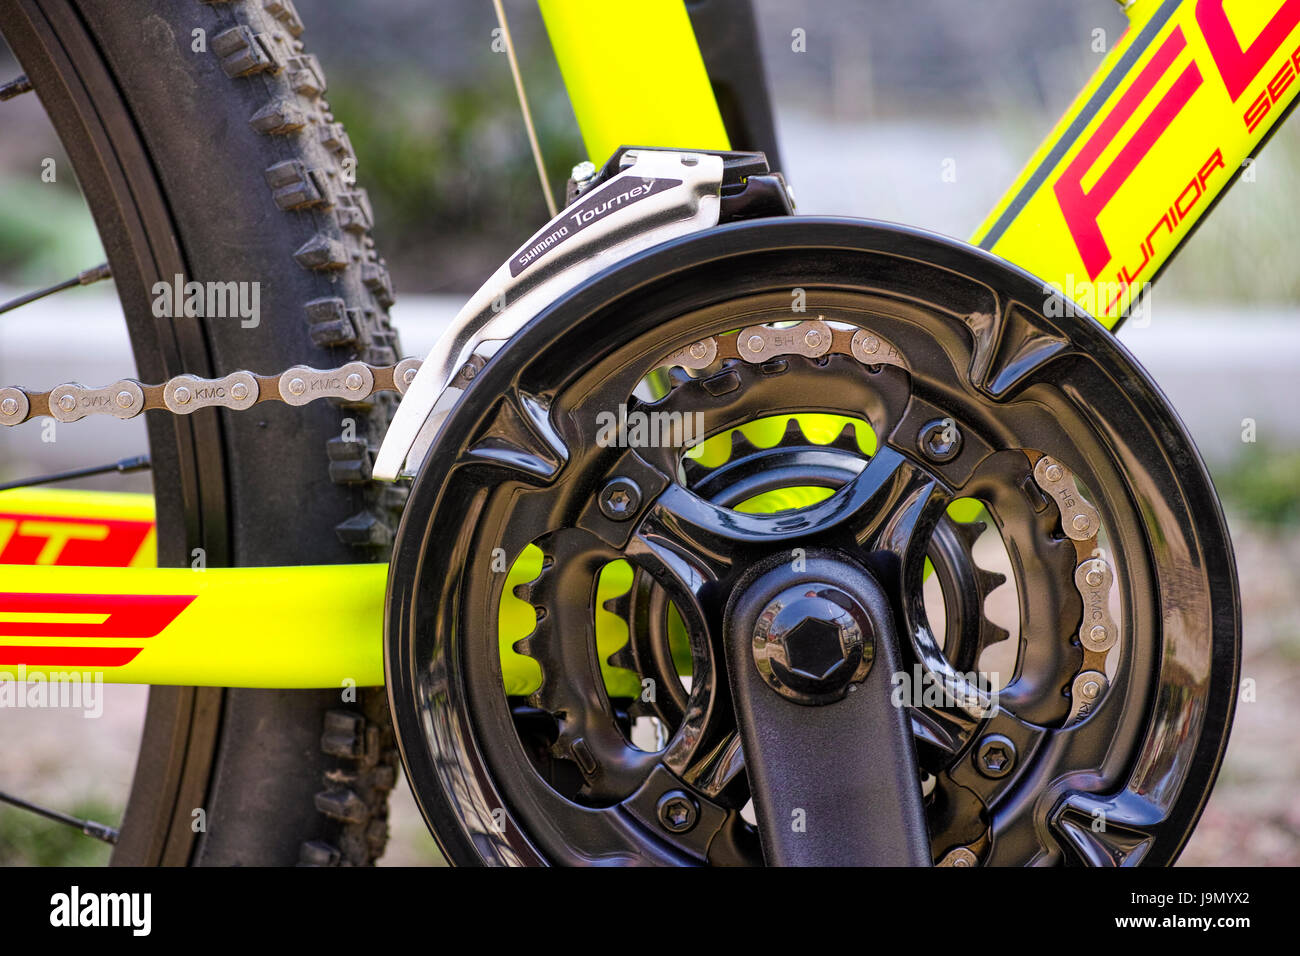 Tambov, Russian Federation - May 07, 2017 Close-up of chainwheel and Shimano Tourney front derailleur on bicycle. Stock Photo